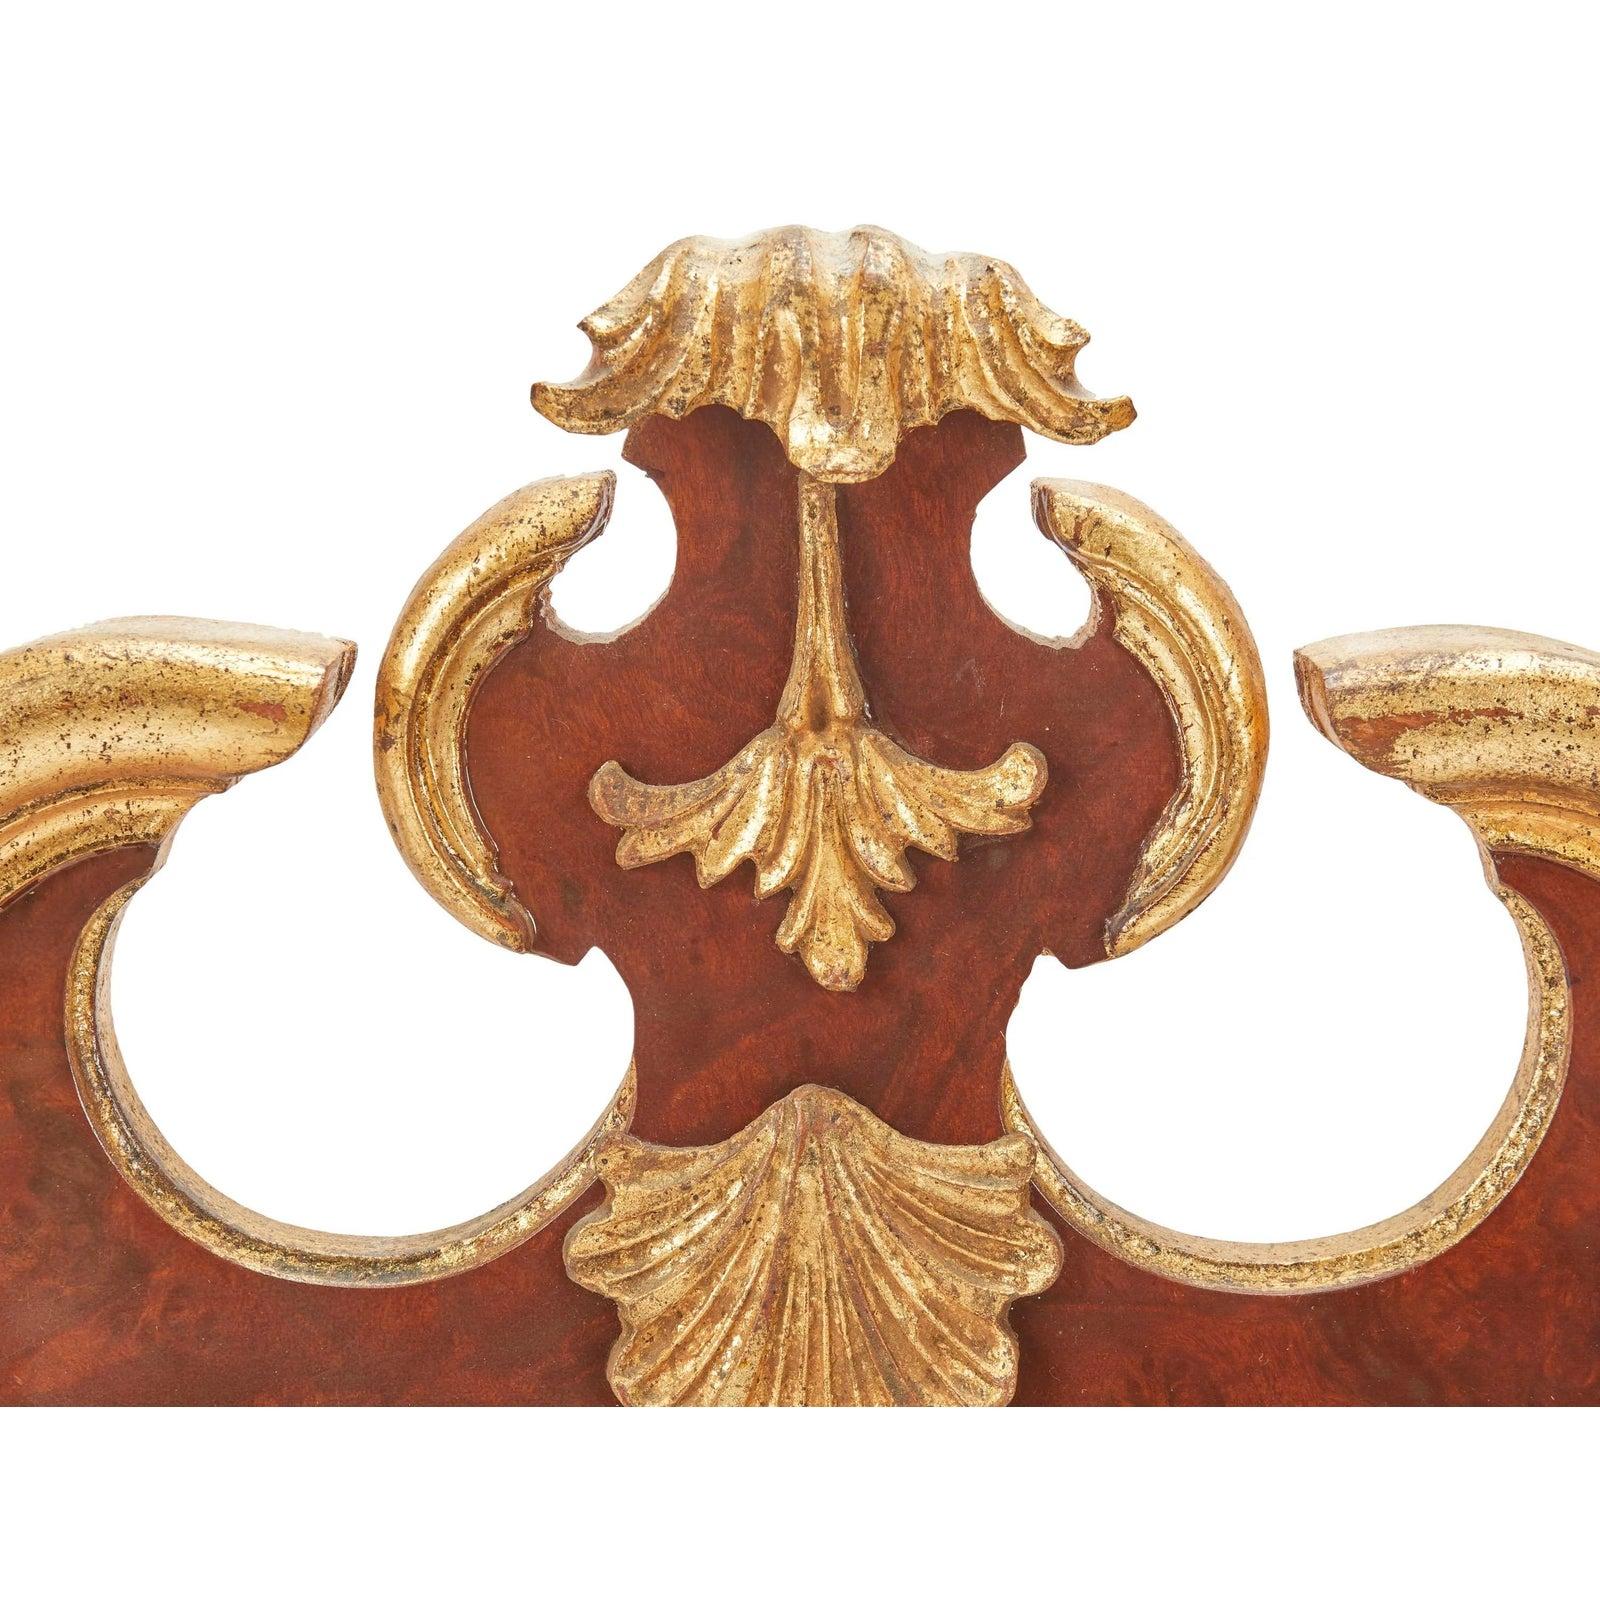 Regency Style Carved Italian Giltwood Wall Mirror W Acanthus Leaves

Additional information:
Materials: Giltwood, Mirror
Color: Gold
Brand: Labarge
Designer: Labarge
Period: 1950s
Styles: Hollywood Regency, Italian, Regency
Item Type: Vintage,